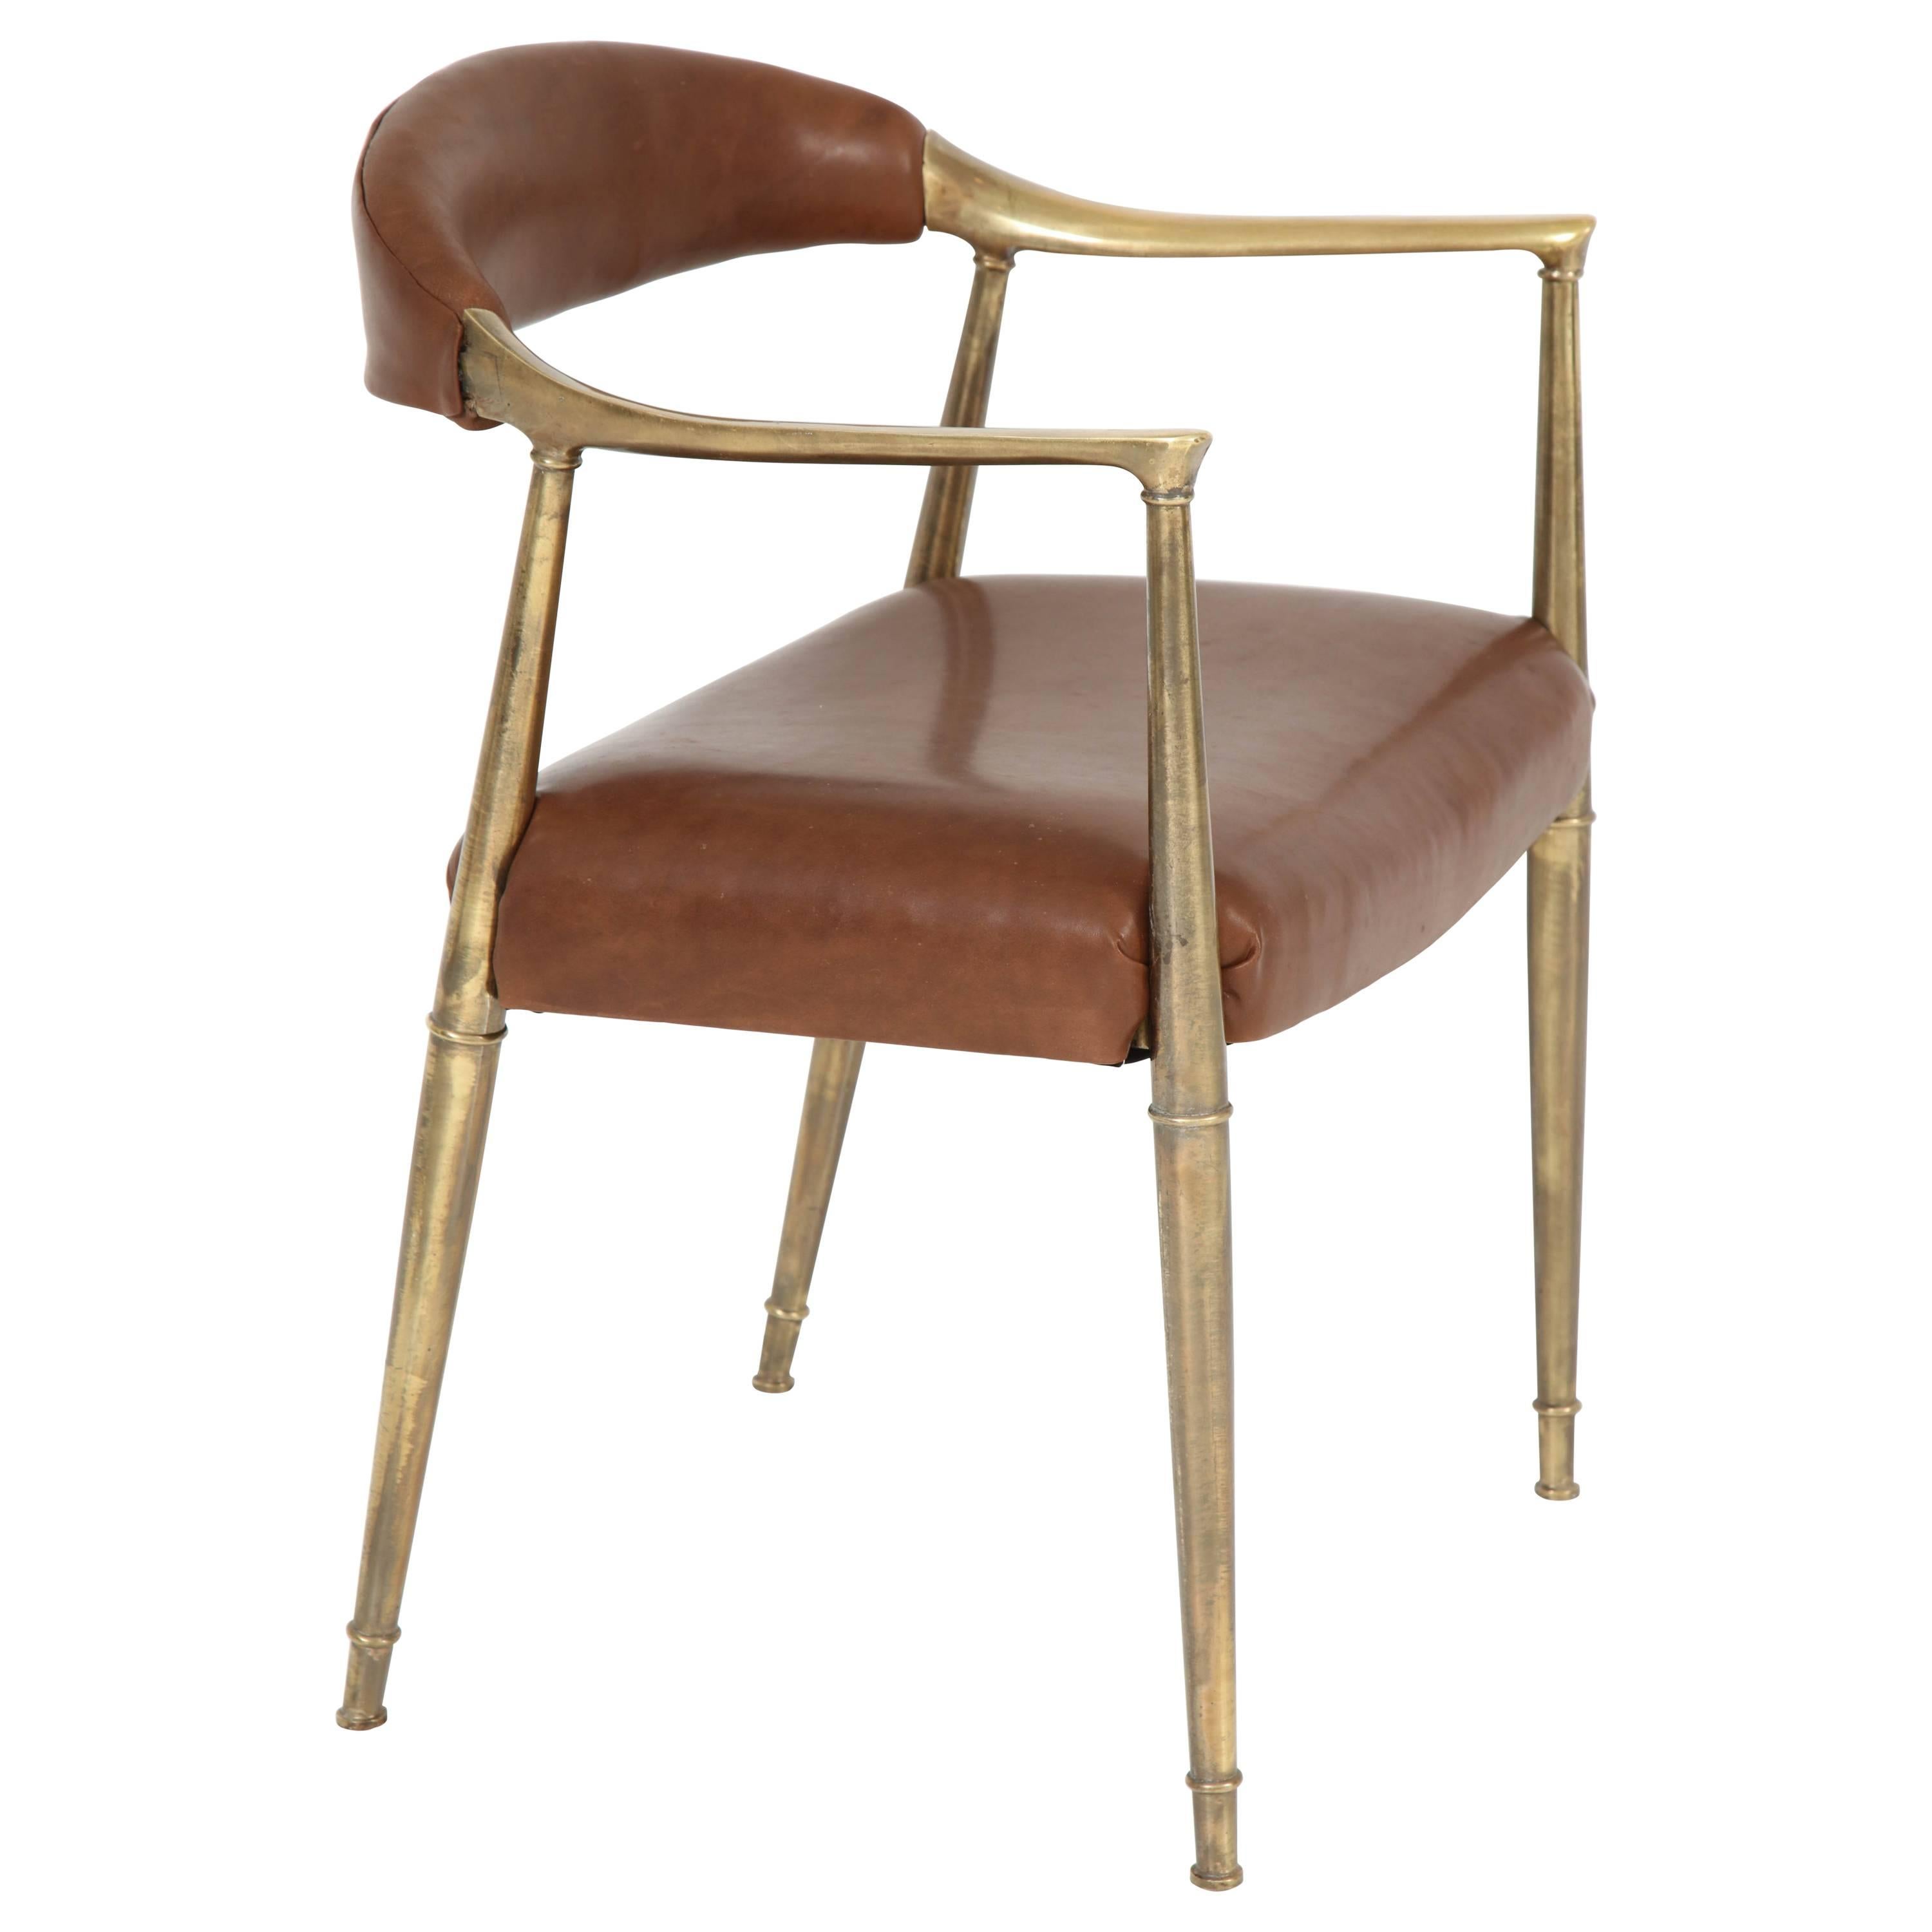 Italian Brass Armchair in Saddle Leather For Sale